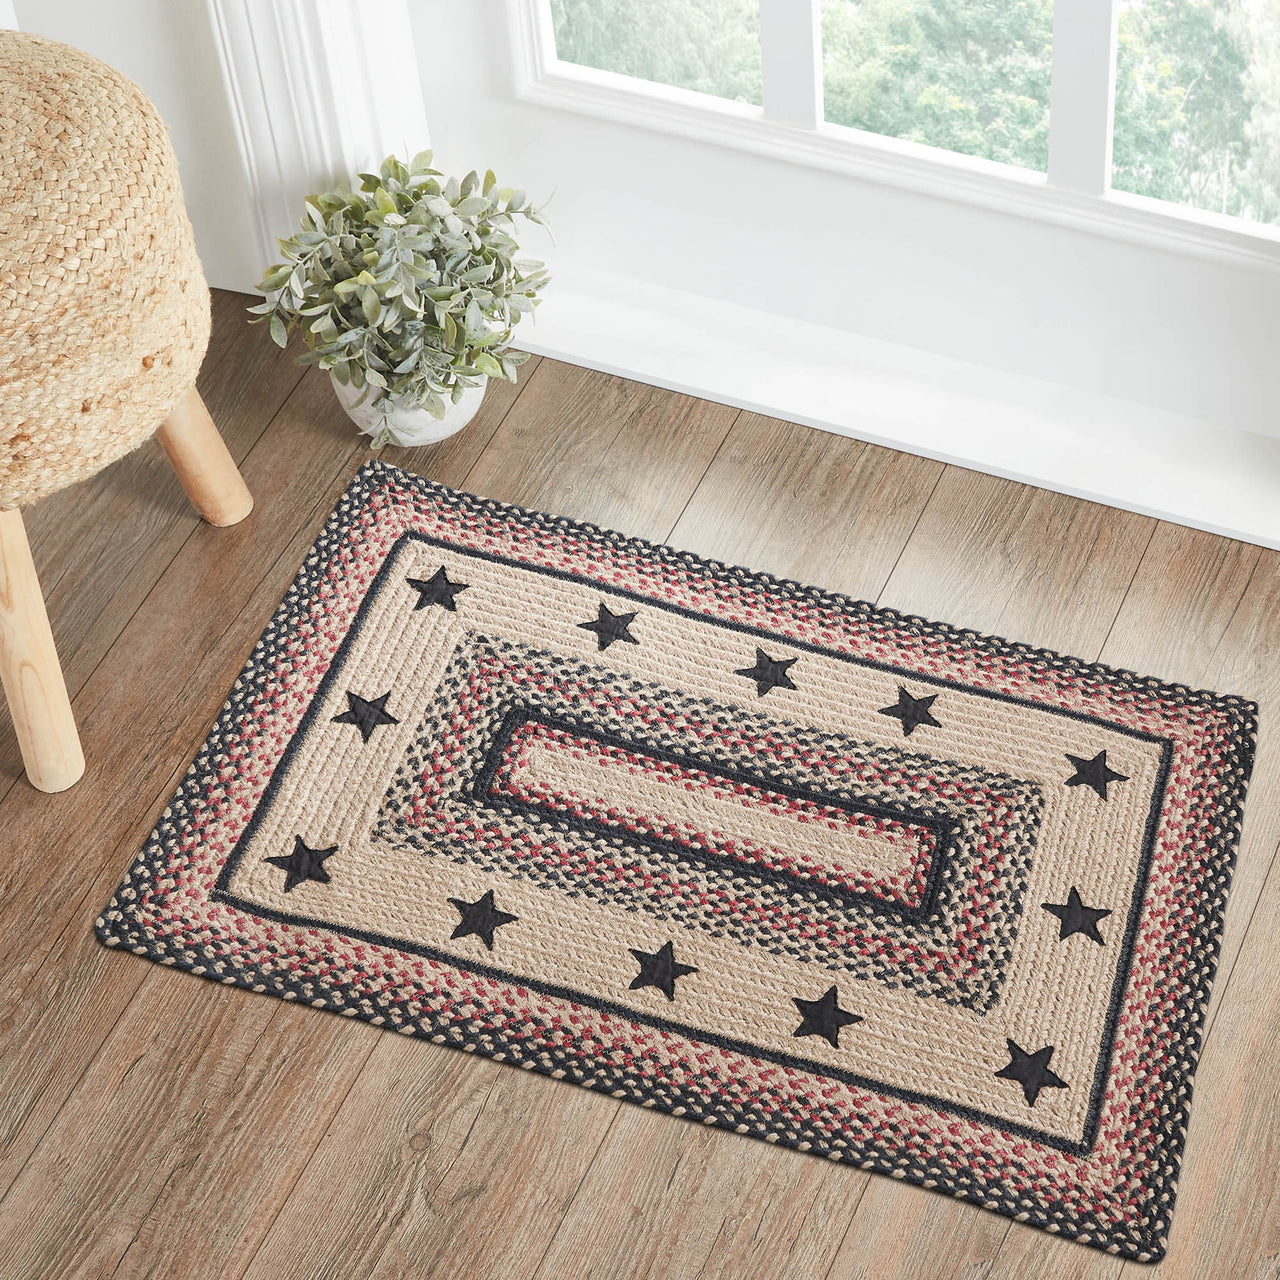 Colonial Star Jute Braided Rug Rect. with Rug Pad 2'x3' VHC Brands